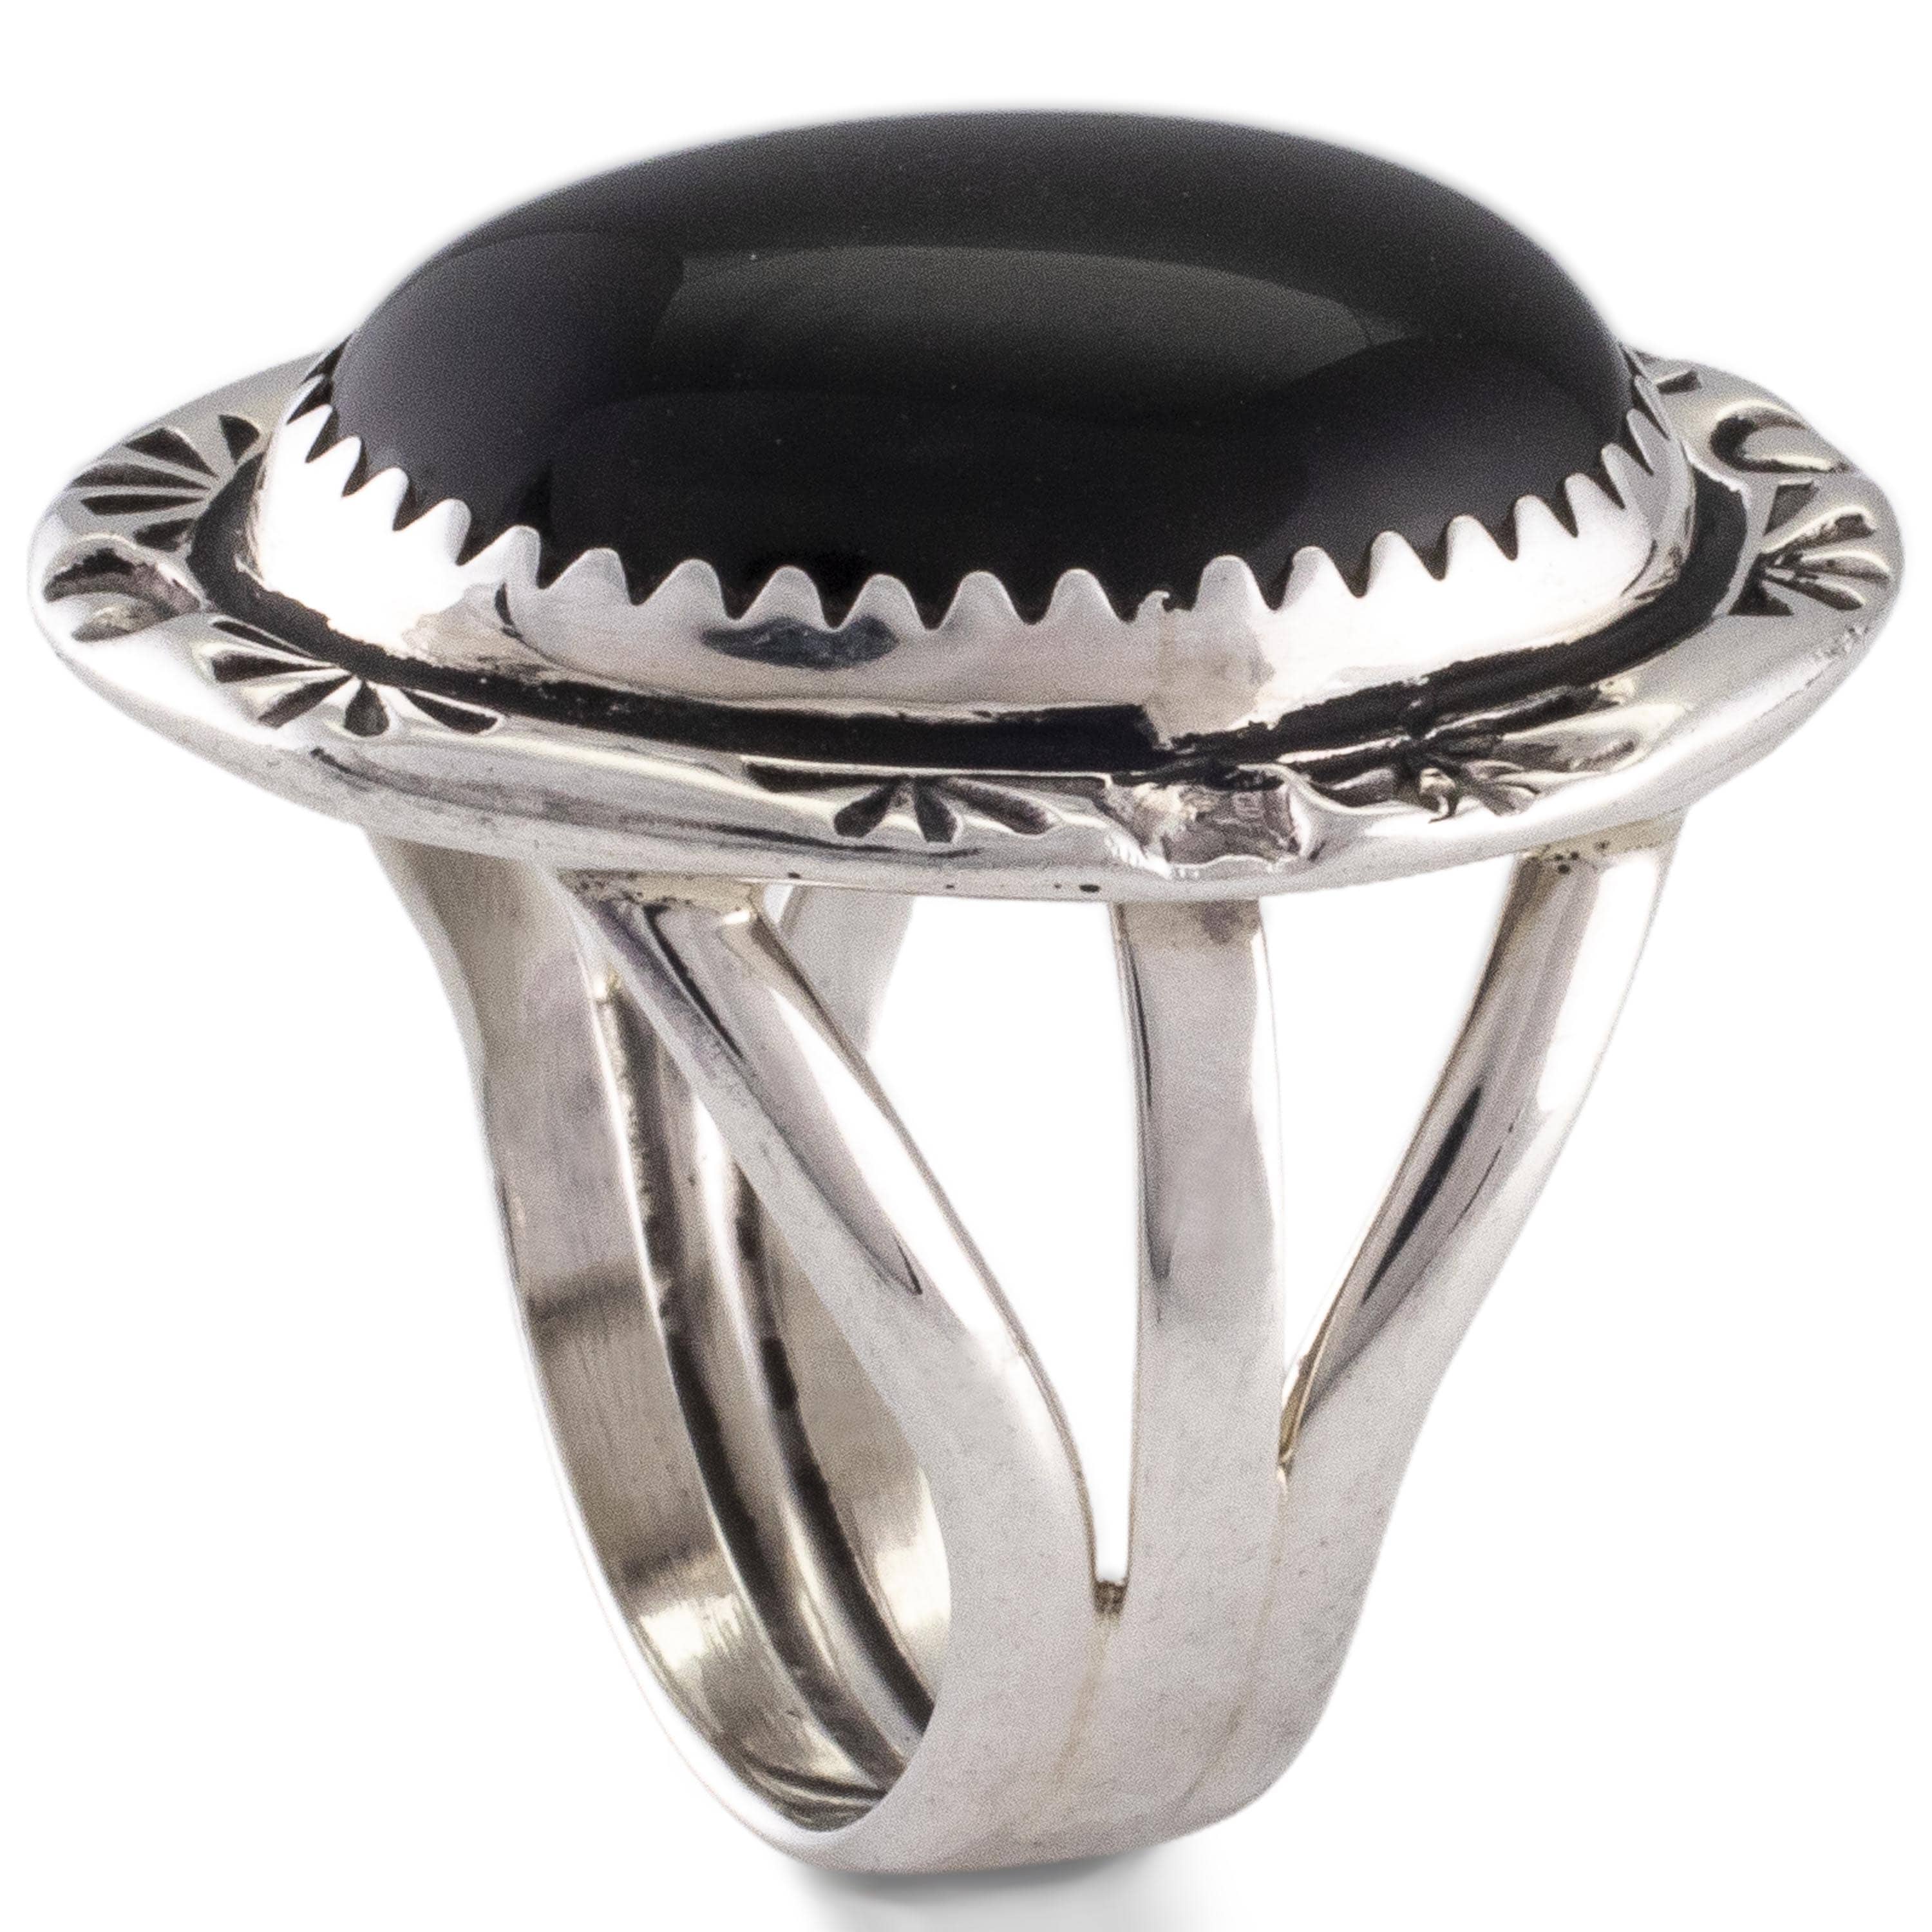 Kalifano Native American Jewelry Black Onyx Oval USA Native American Made 925 Sterling Silver Ring